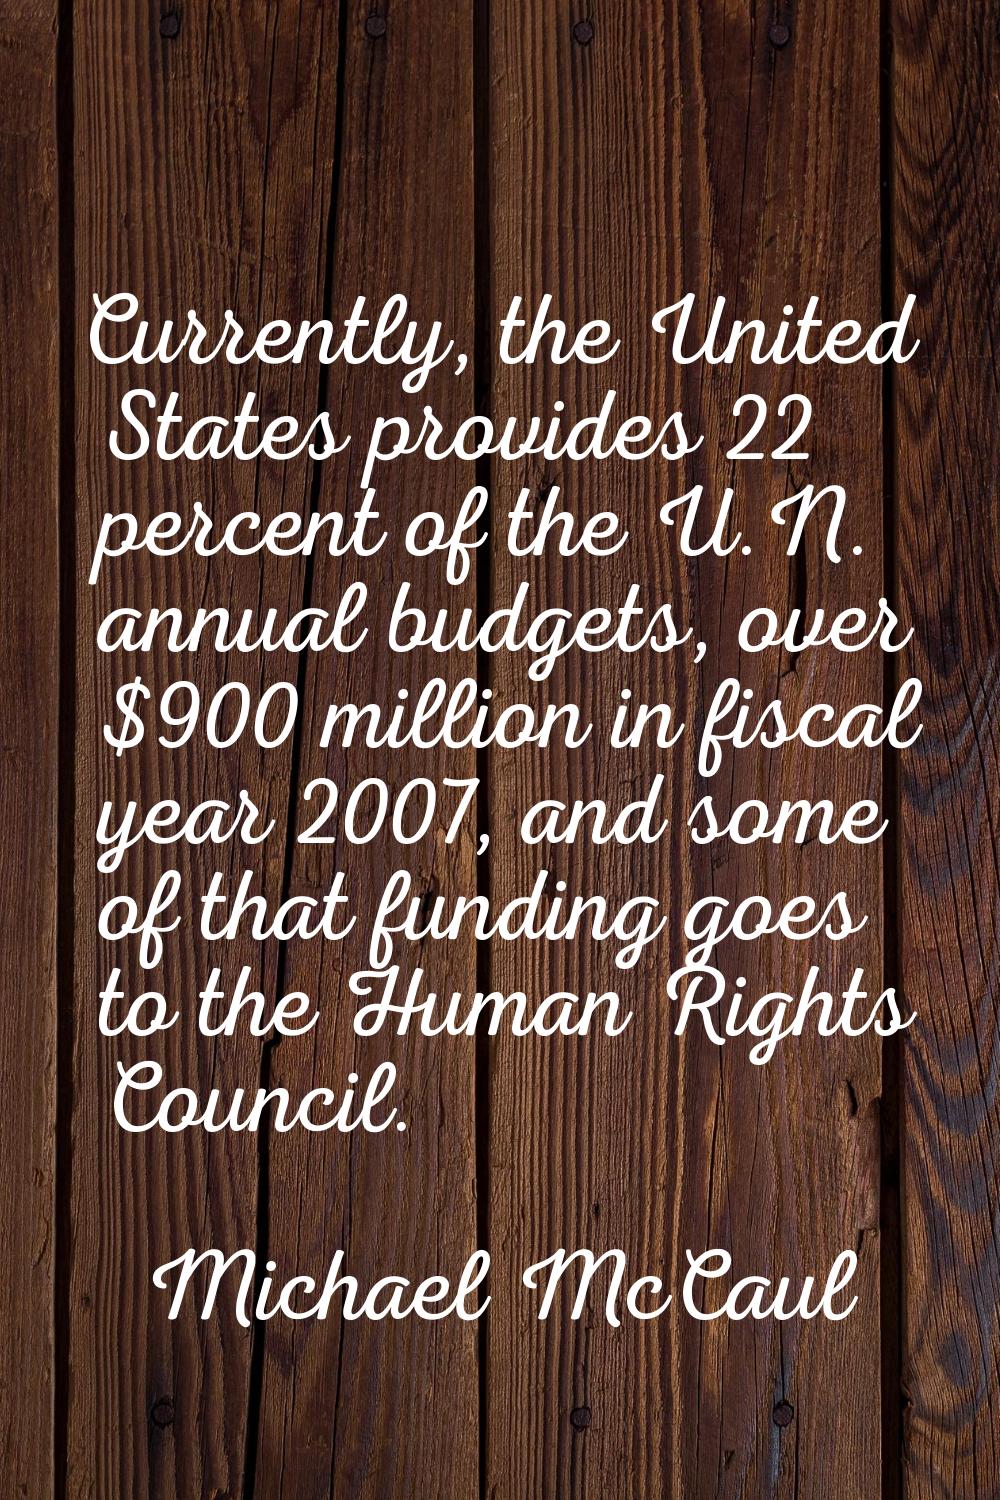 Currently, the United States provides 22 percent of the U.N. annual budgets, over $900 million in f